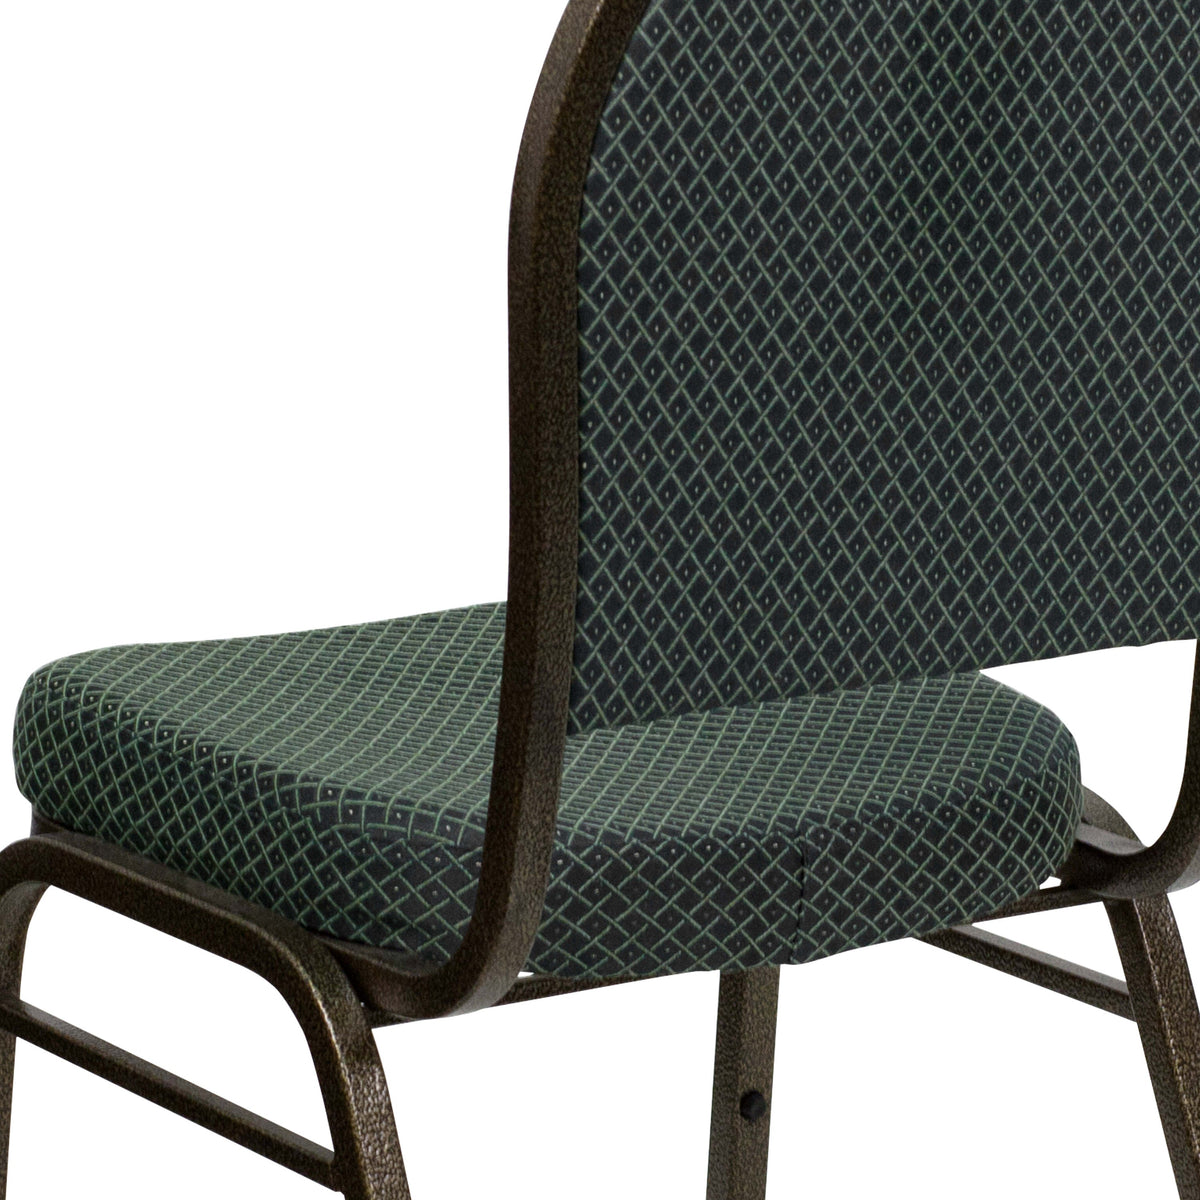 Green Patterned Fabric/Gold Vein Frame |#| Dome Back Stacking Banquet Chair in Green Patterned Fabric - Gold Vein Frame